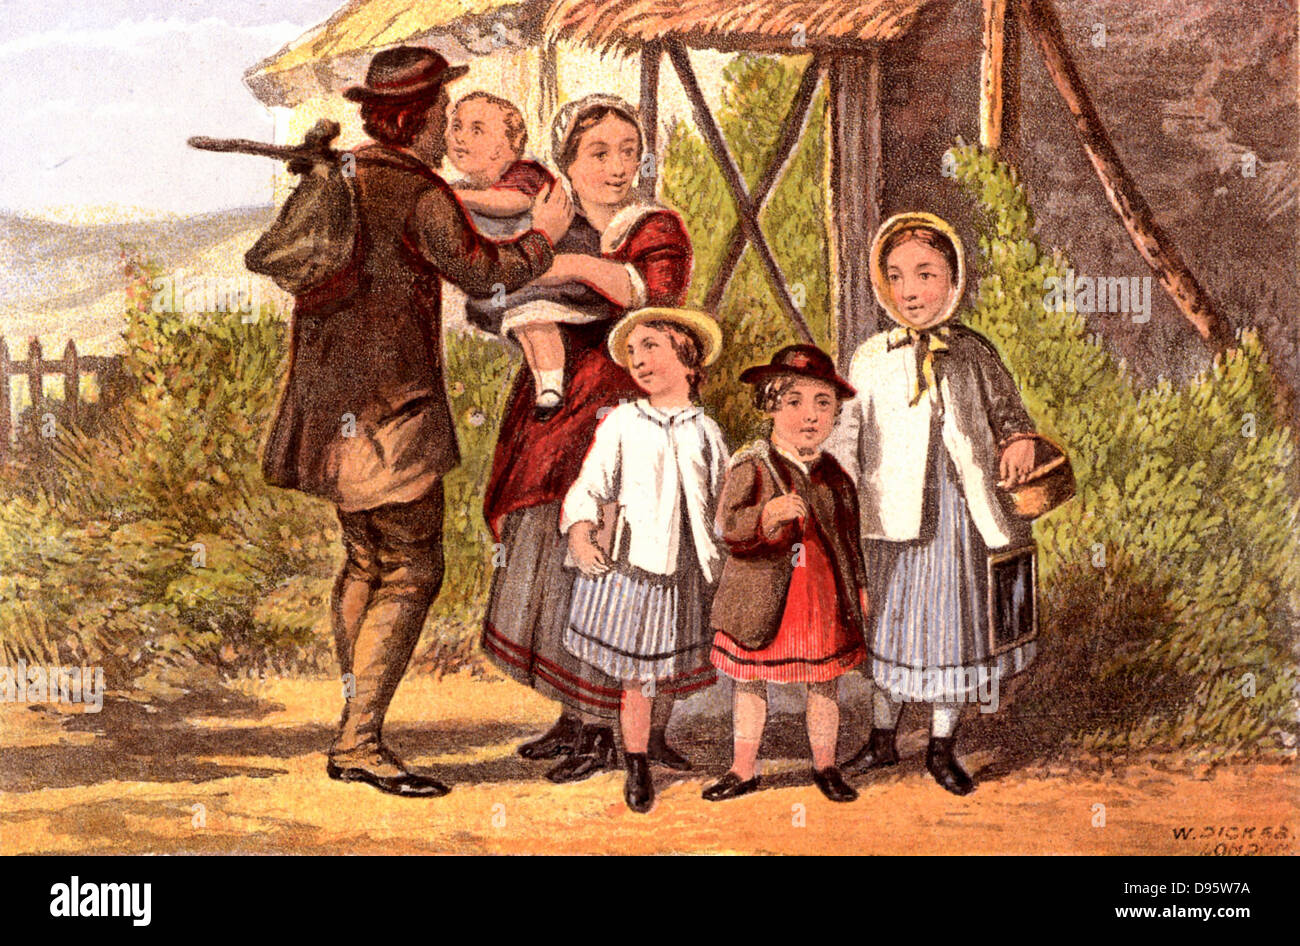 Monday Morning: father going to work with food tied up in a cloth, saying goodbye to his family. The three older children leave for school.  The girl on the right has her writing slate hanging from her waist.  From 'Household Pictures for Home and School'. Chromolithograph c1890. Stock Photo